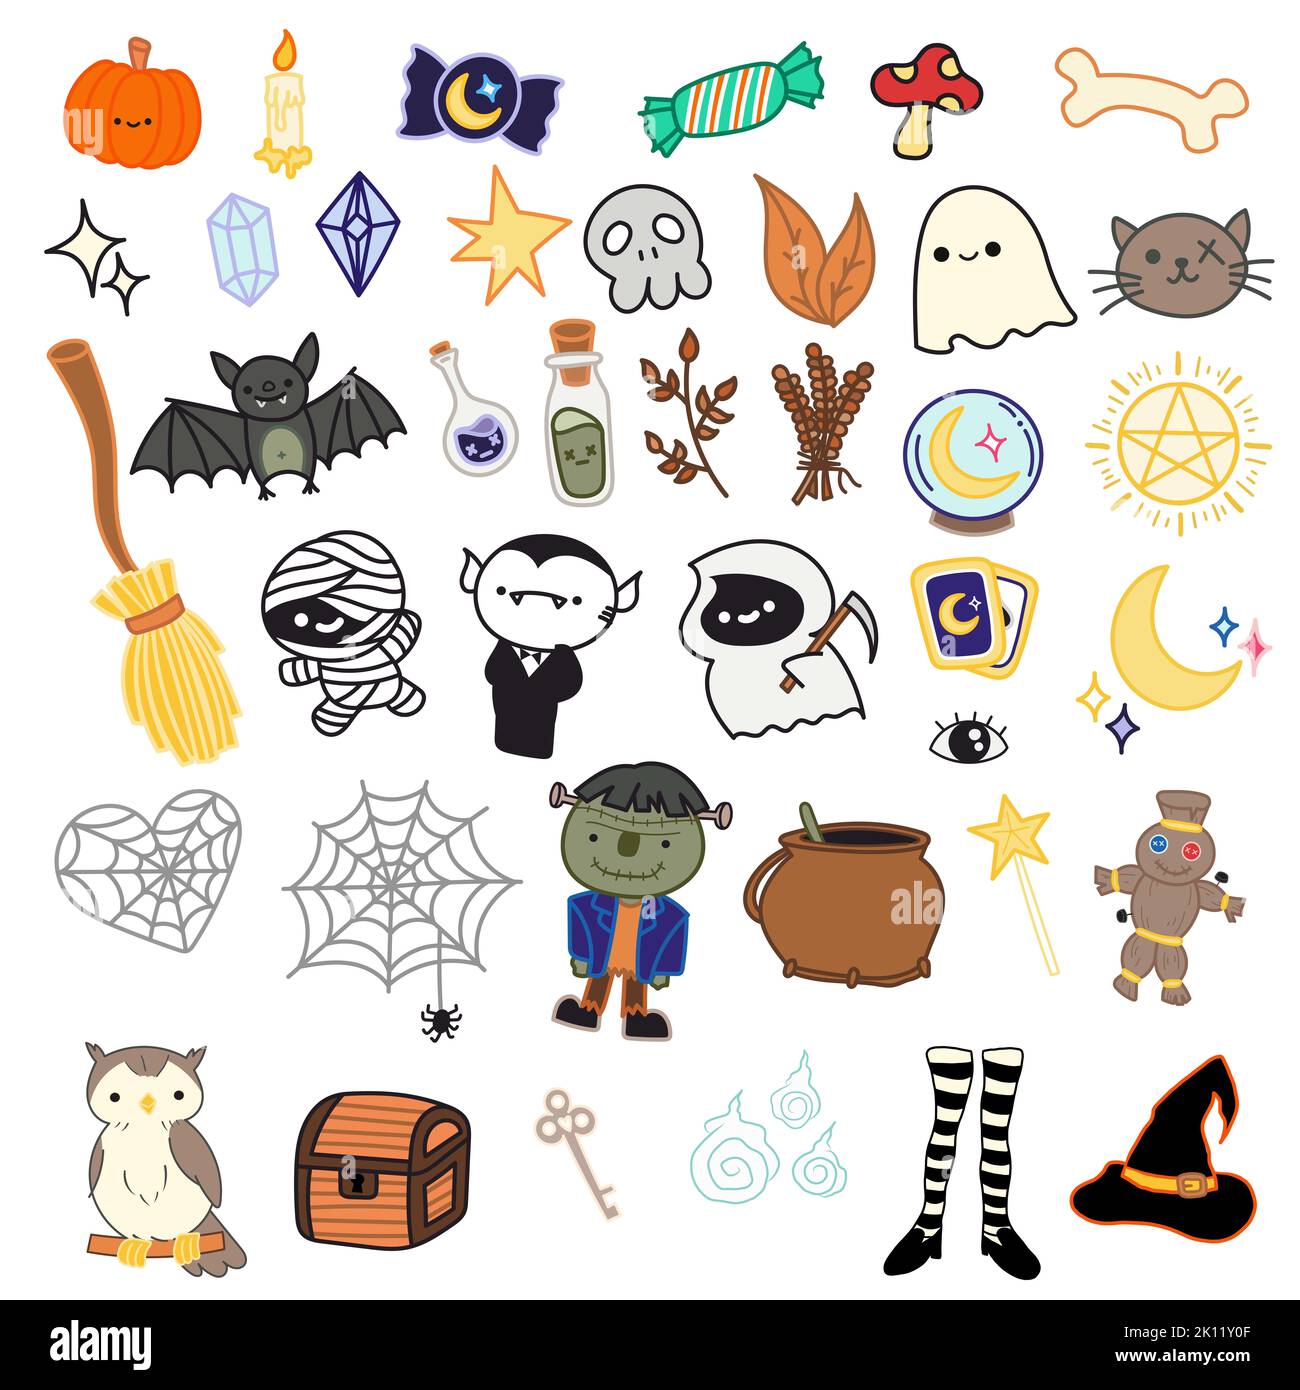 https://c8.alamy.com/comp/2K11Y0F/happy-halloween-magic-cute-collection-hand-drawn-color-doodles-elements-for-decoration-isolated-on-white-background-great-for-sticker-decoration-2K11Y0F.jpg